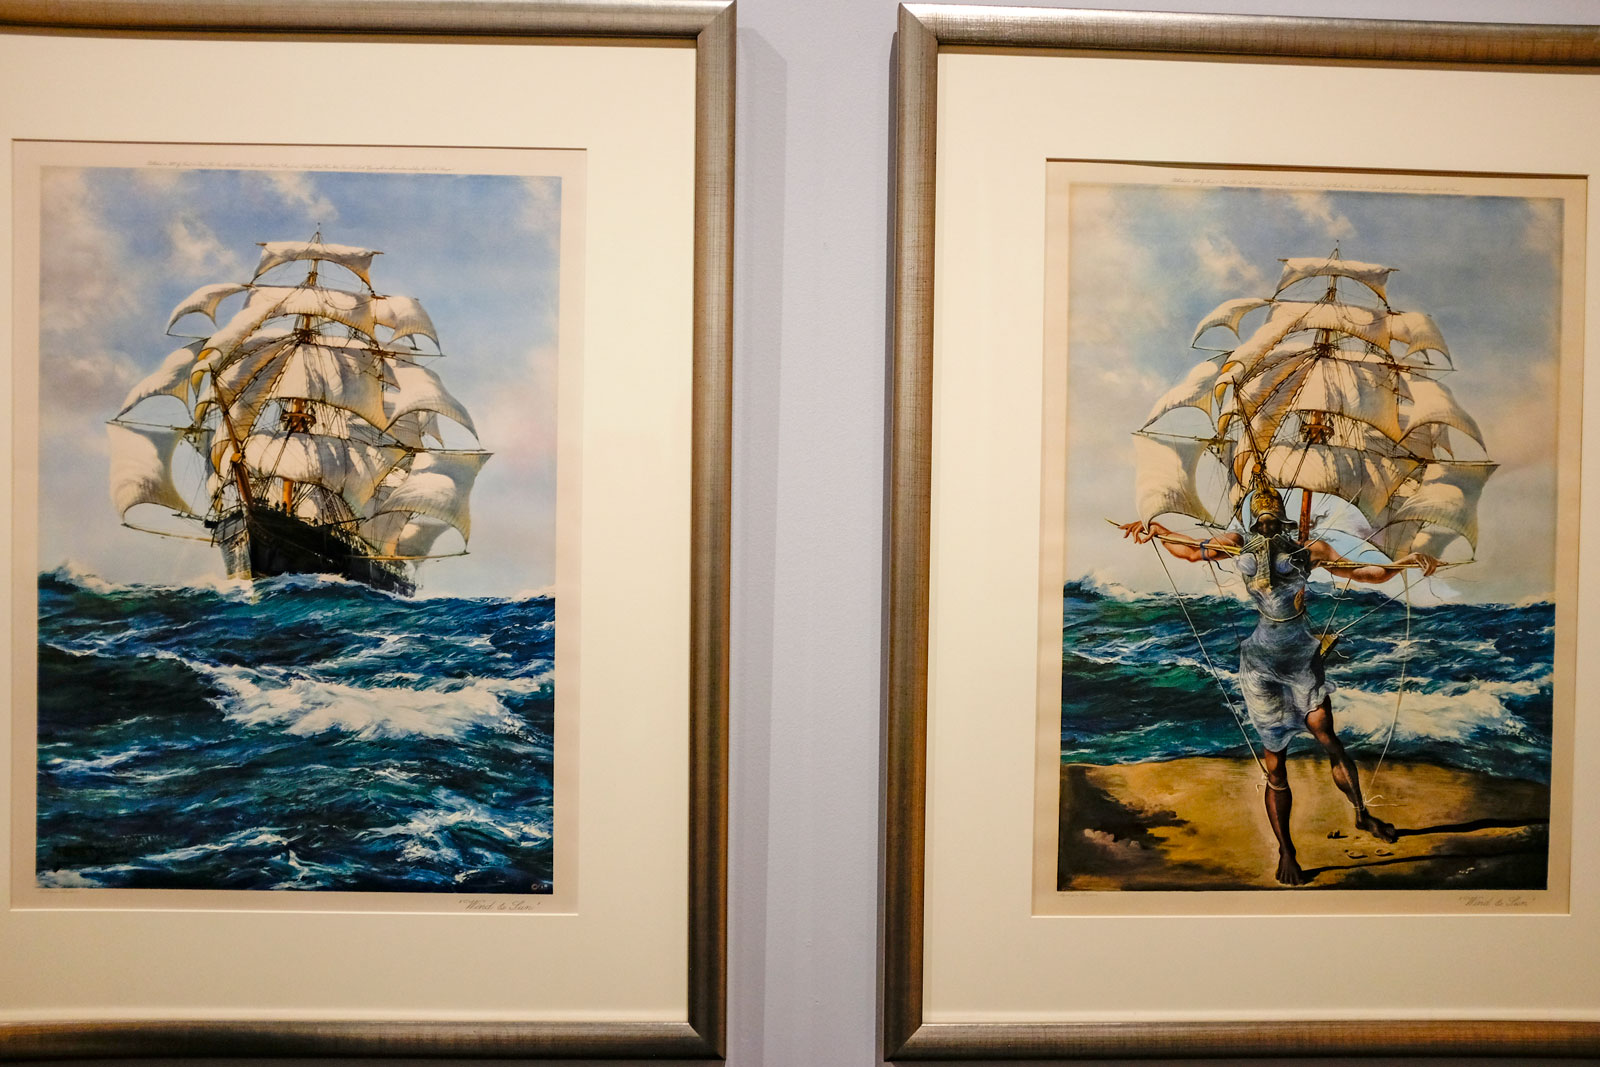 Two paintings at the Dali Museum in St. Petersburg